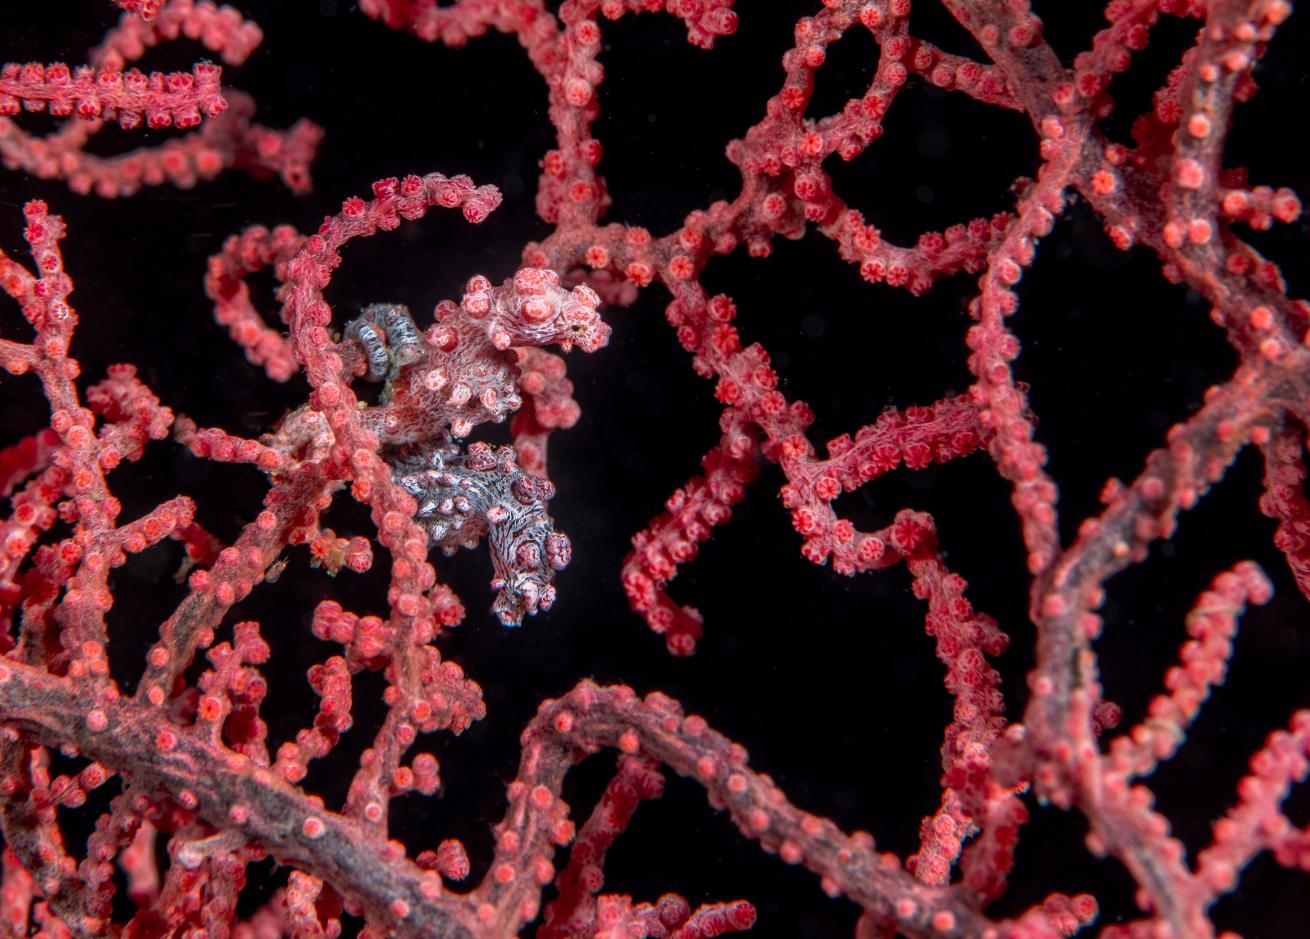 Red seahorse wrapped around red coral